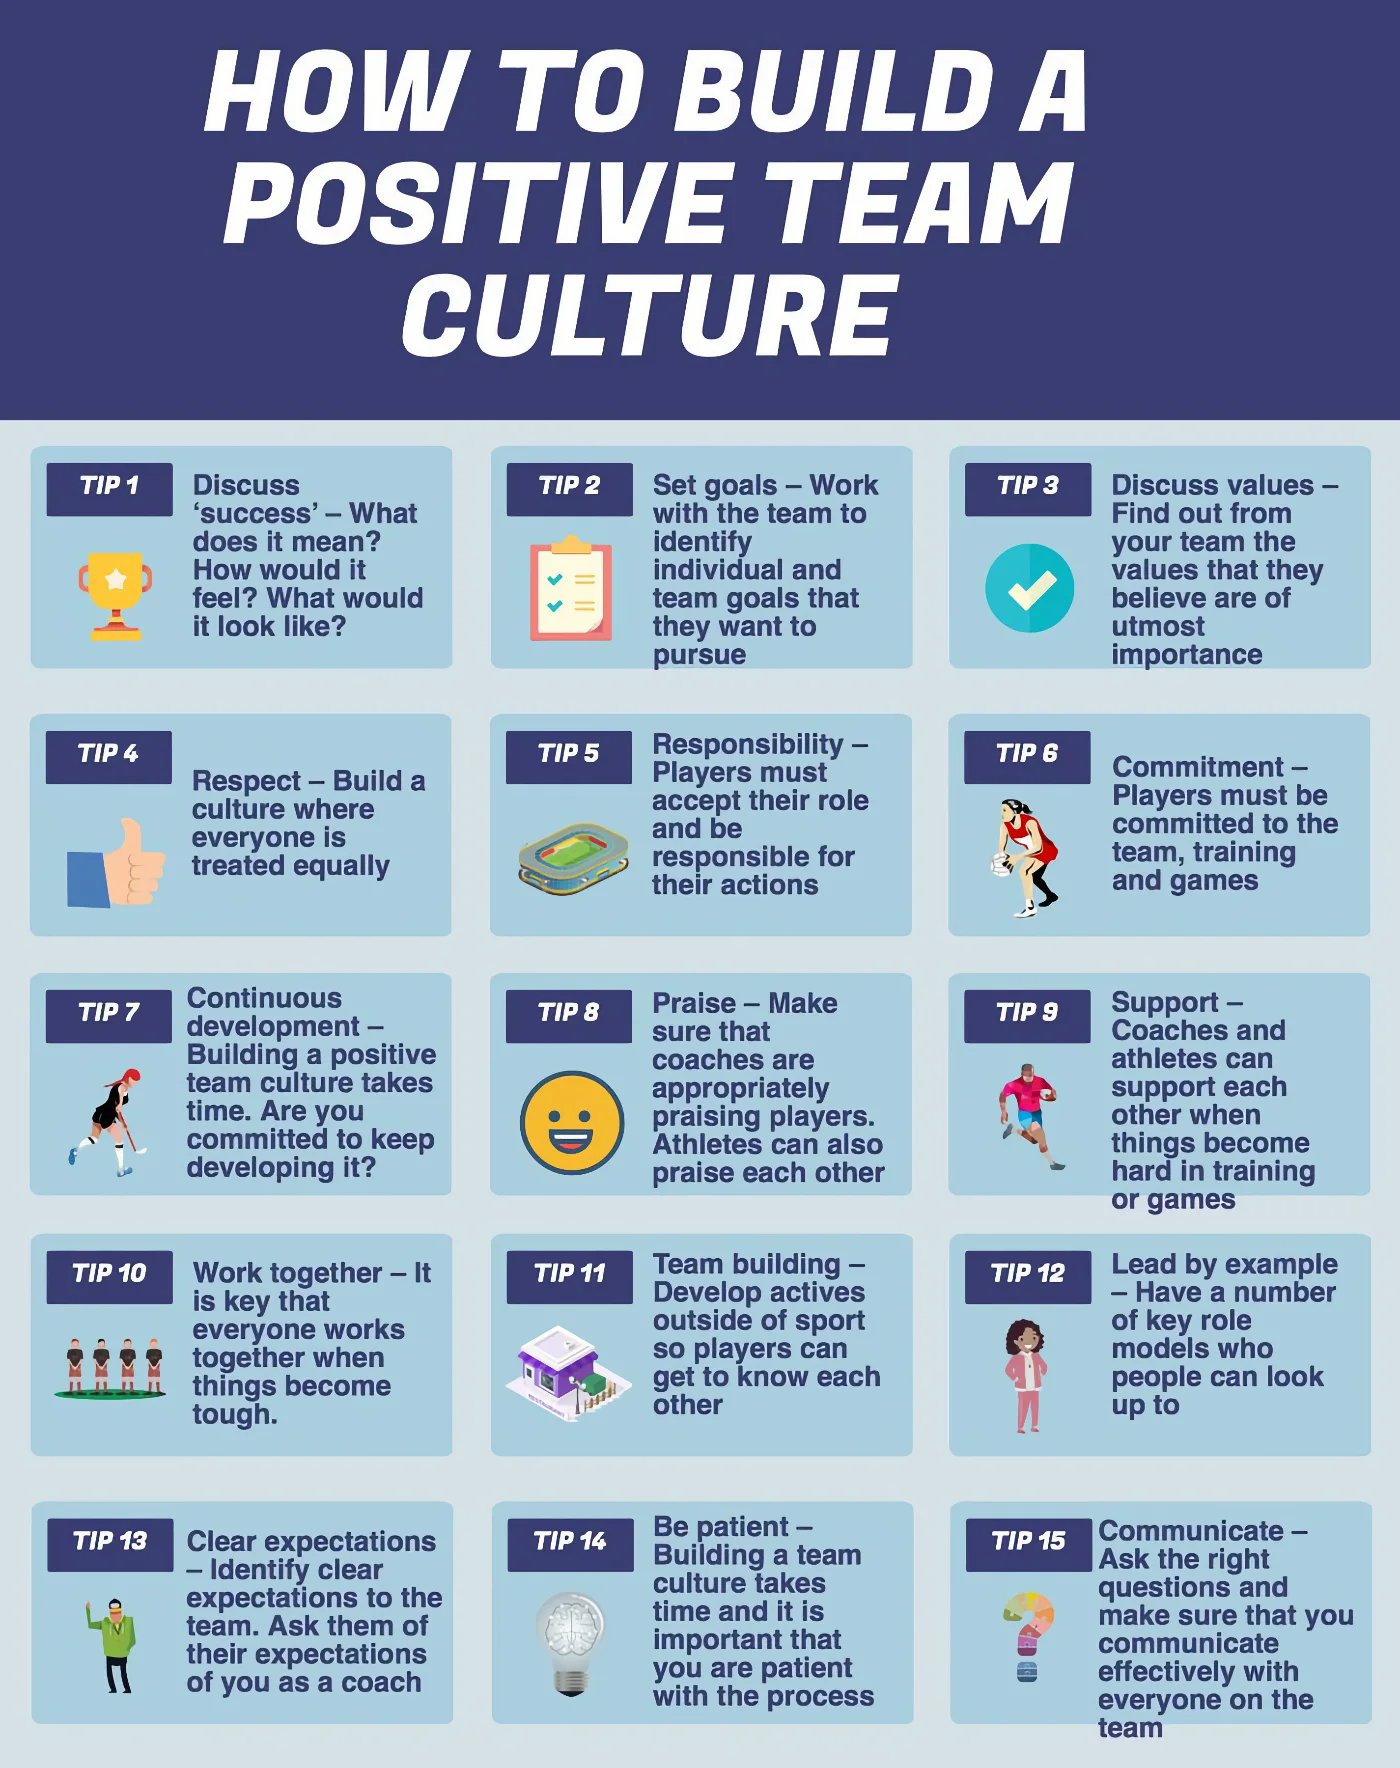 How to build a positive team culture